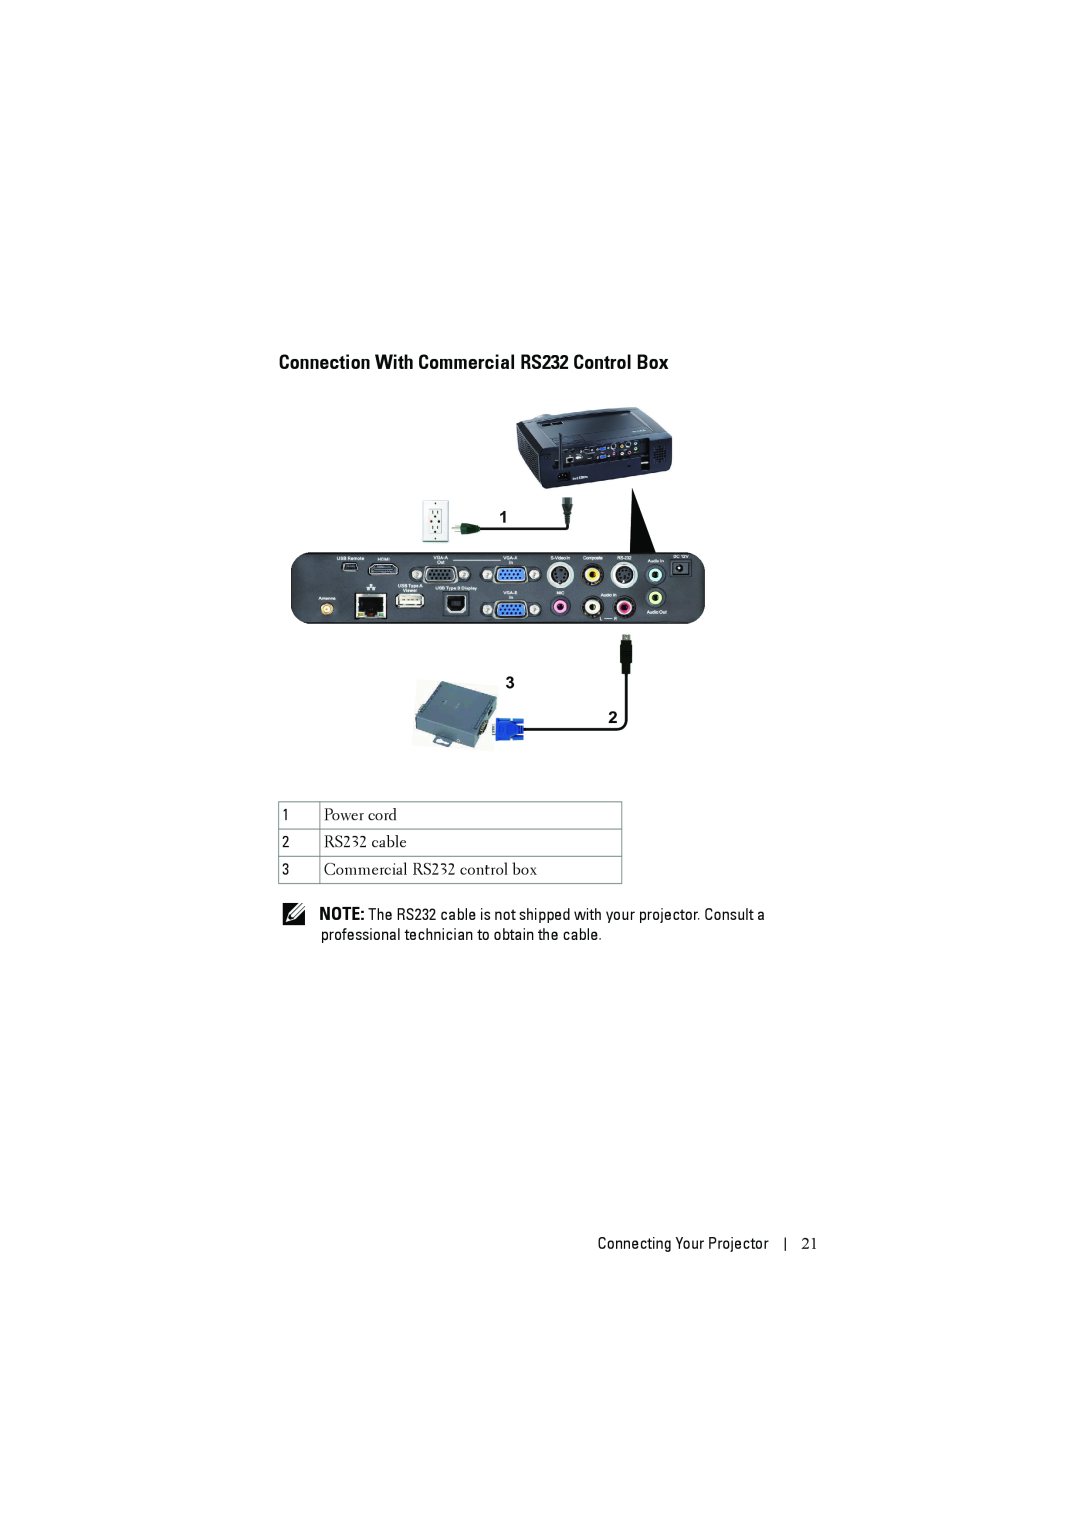 Dell S300W manual Connection With Commercial RS232 Control Box, Power cord RS232 cable Commercial RS232 control box 